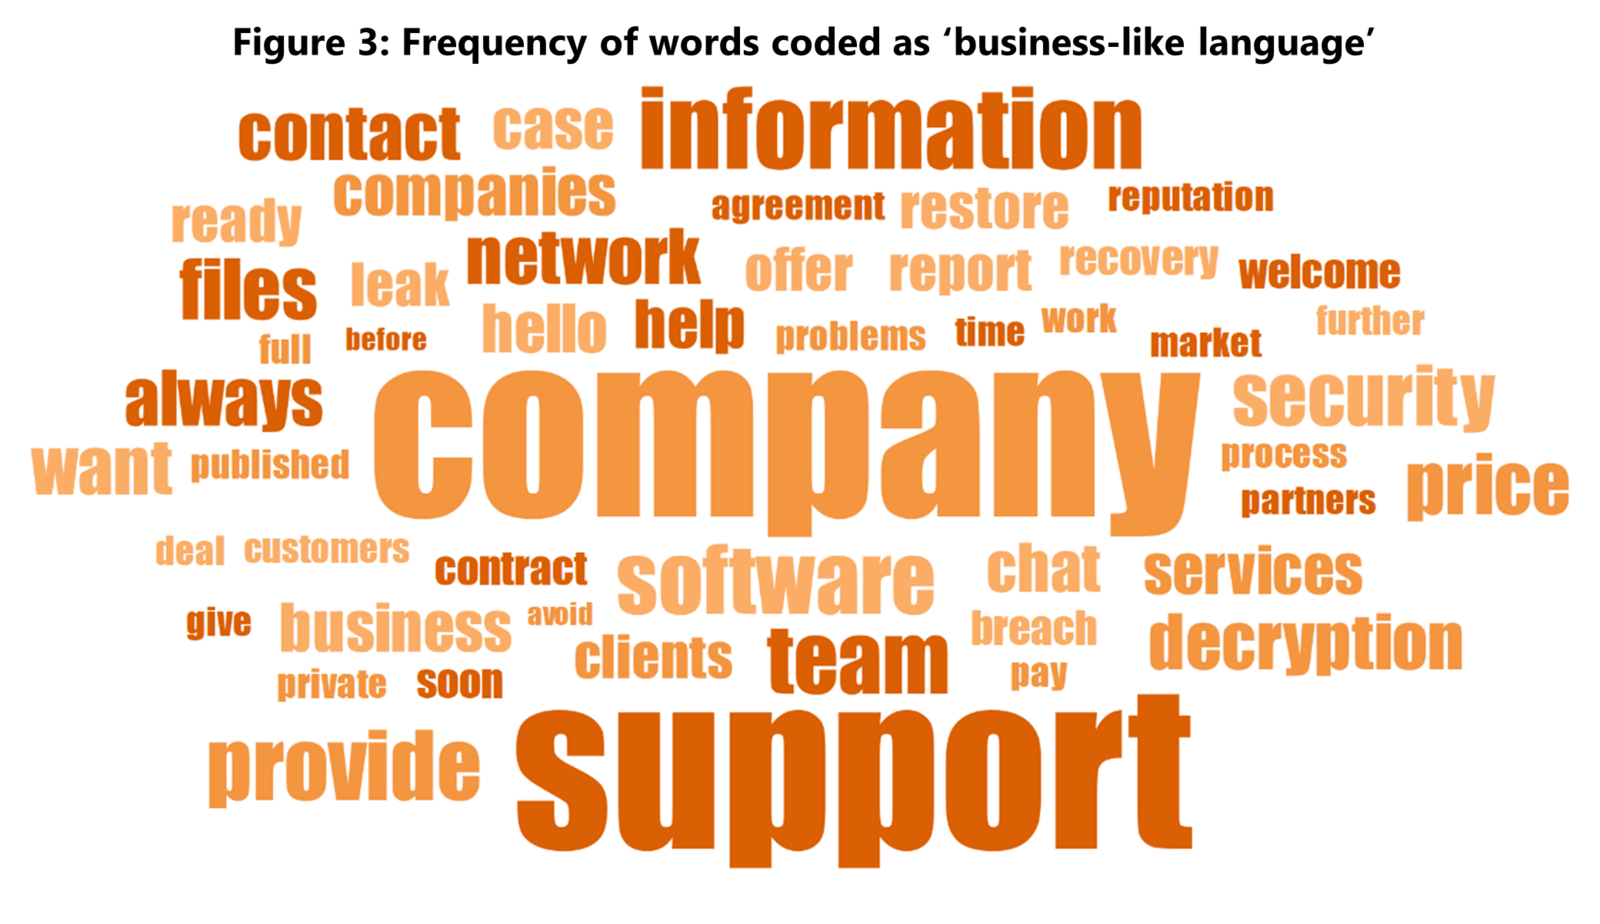 Frequency of words coded as "business-like language"